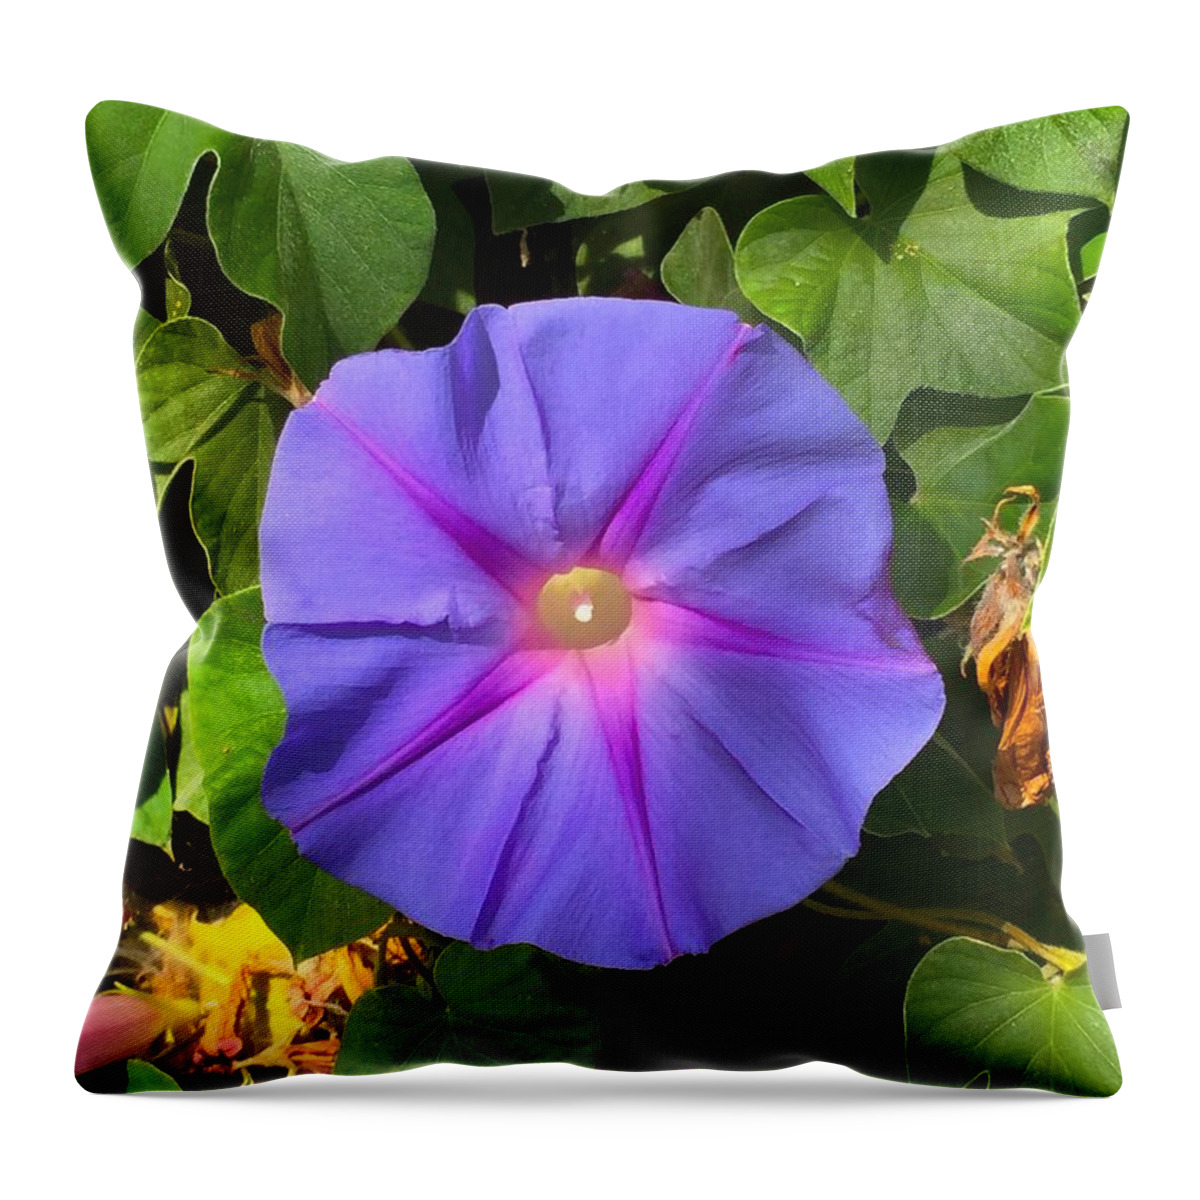 Fauna Throw Pillow featuring the photograph Purple Star by Brad Hodges